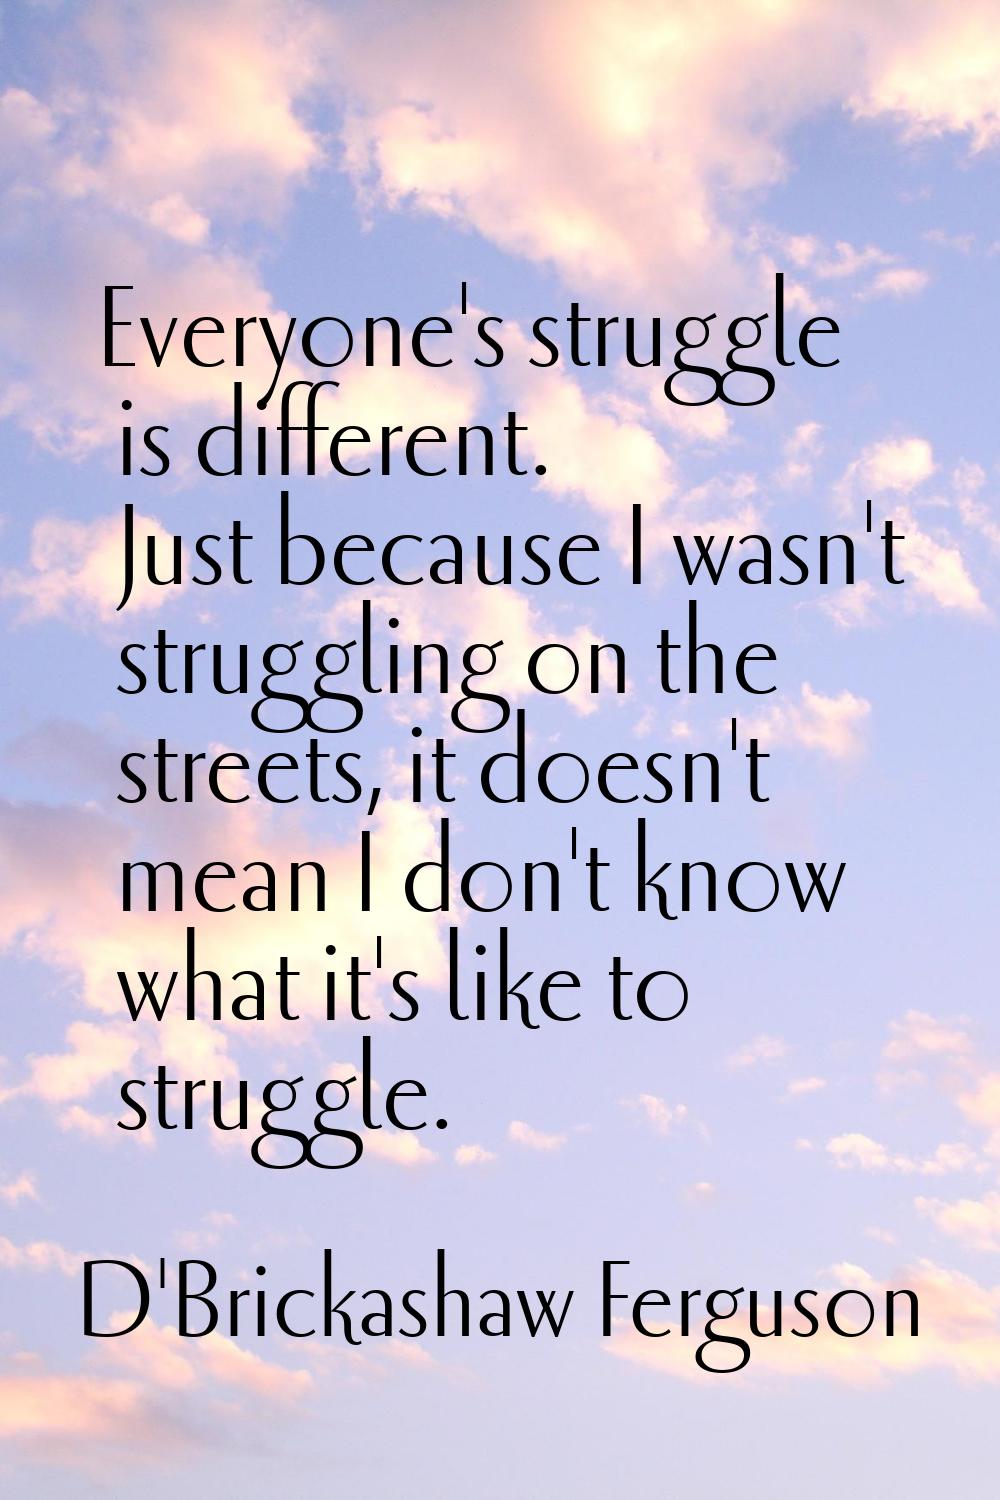 Everyone's struggle is different. Just because I wasn't struggling on the streets, it doesn't mean 